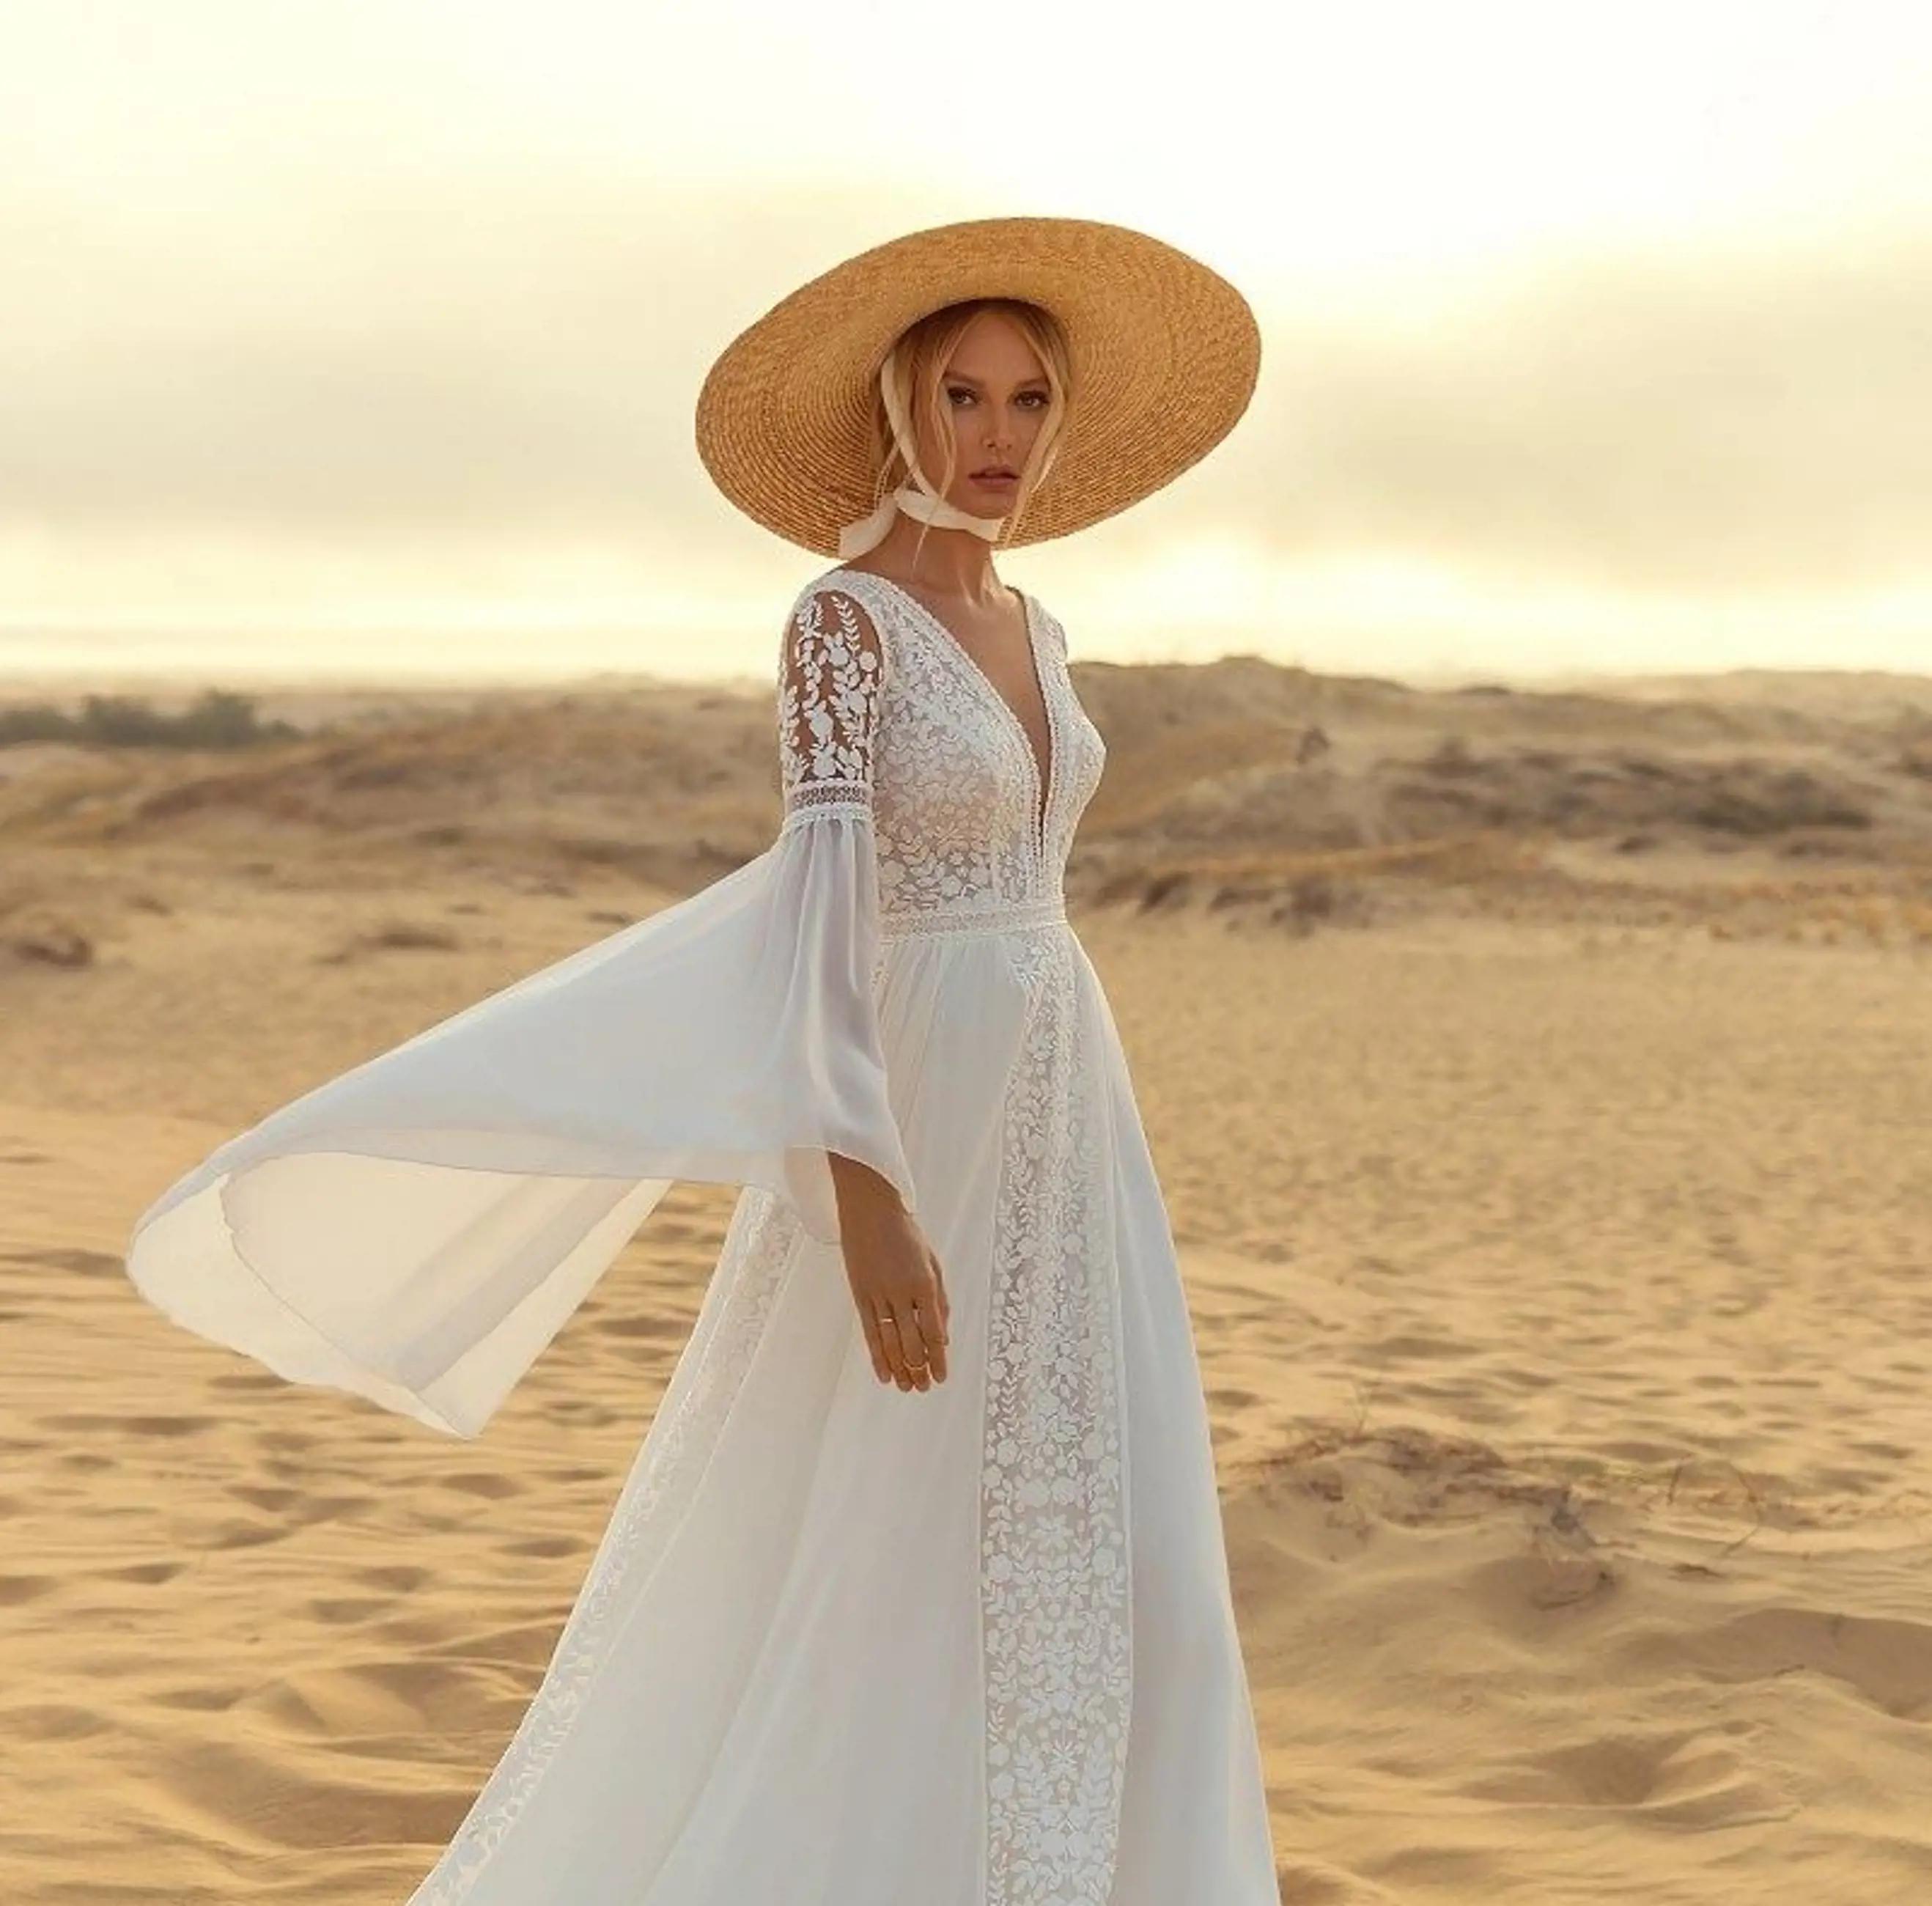 Bridal Gowns For Your Bohemian Wedding Image